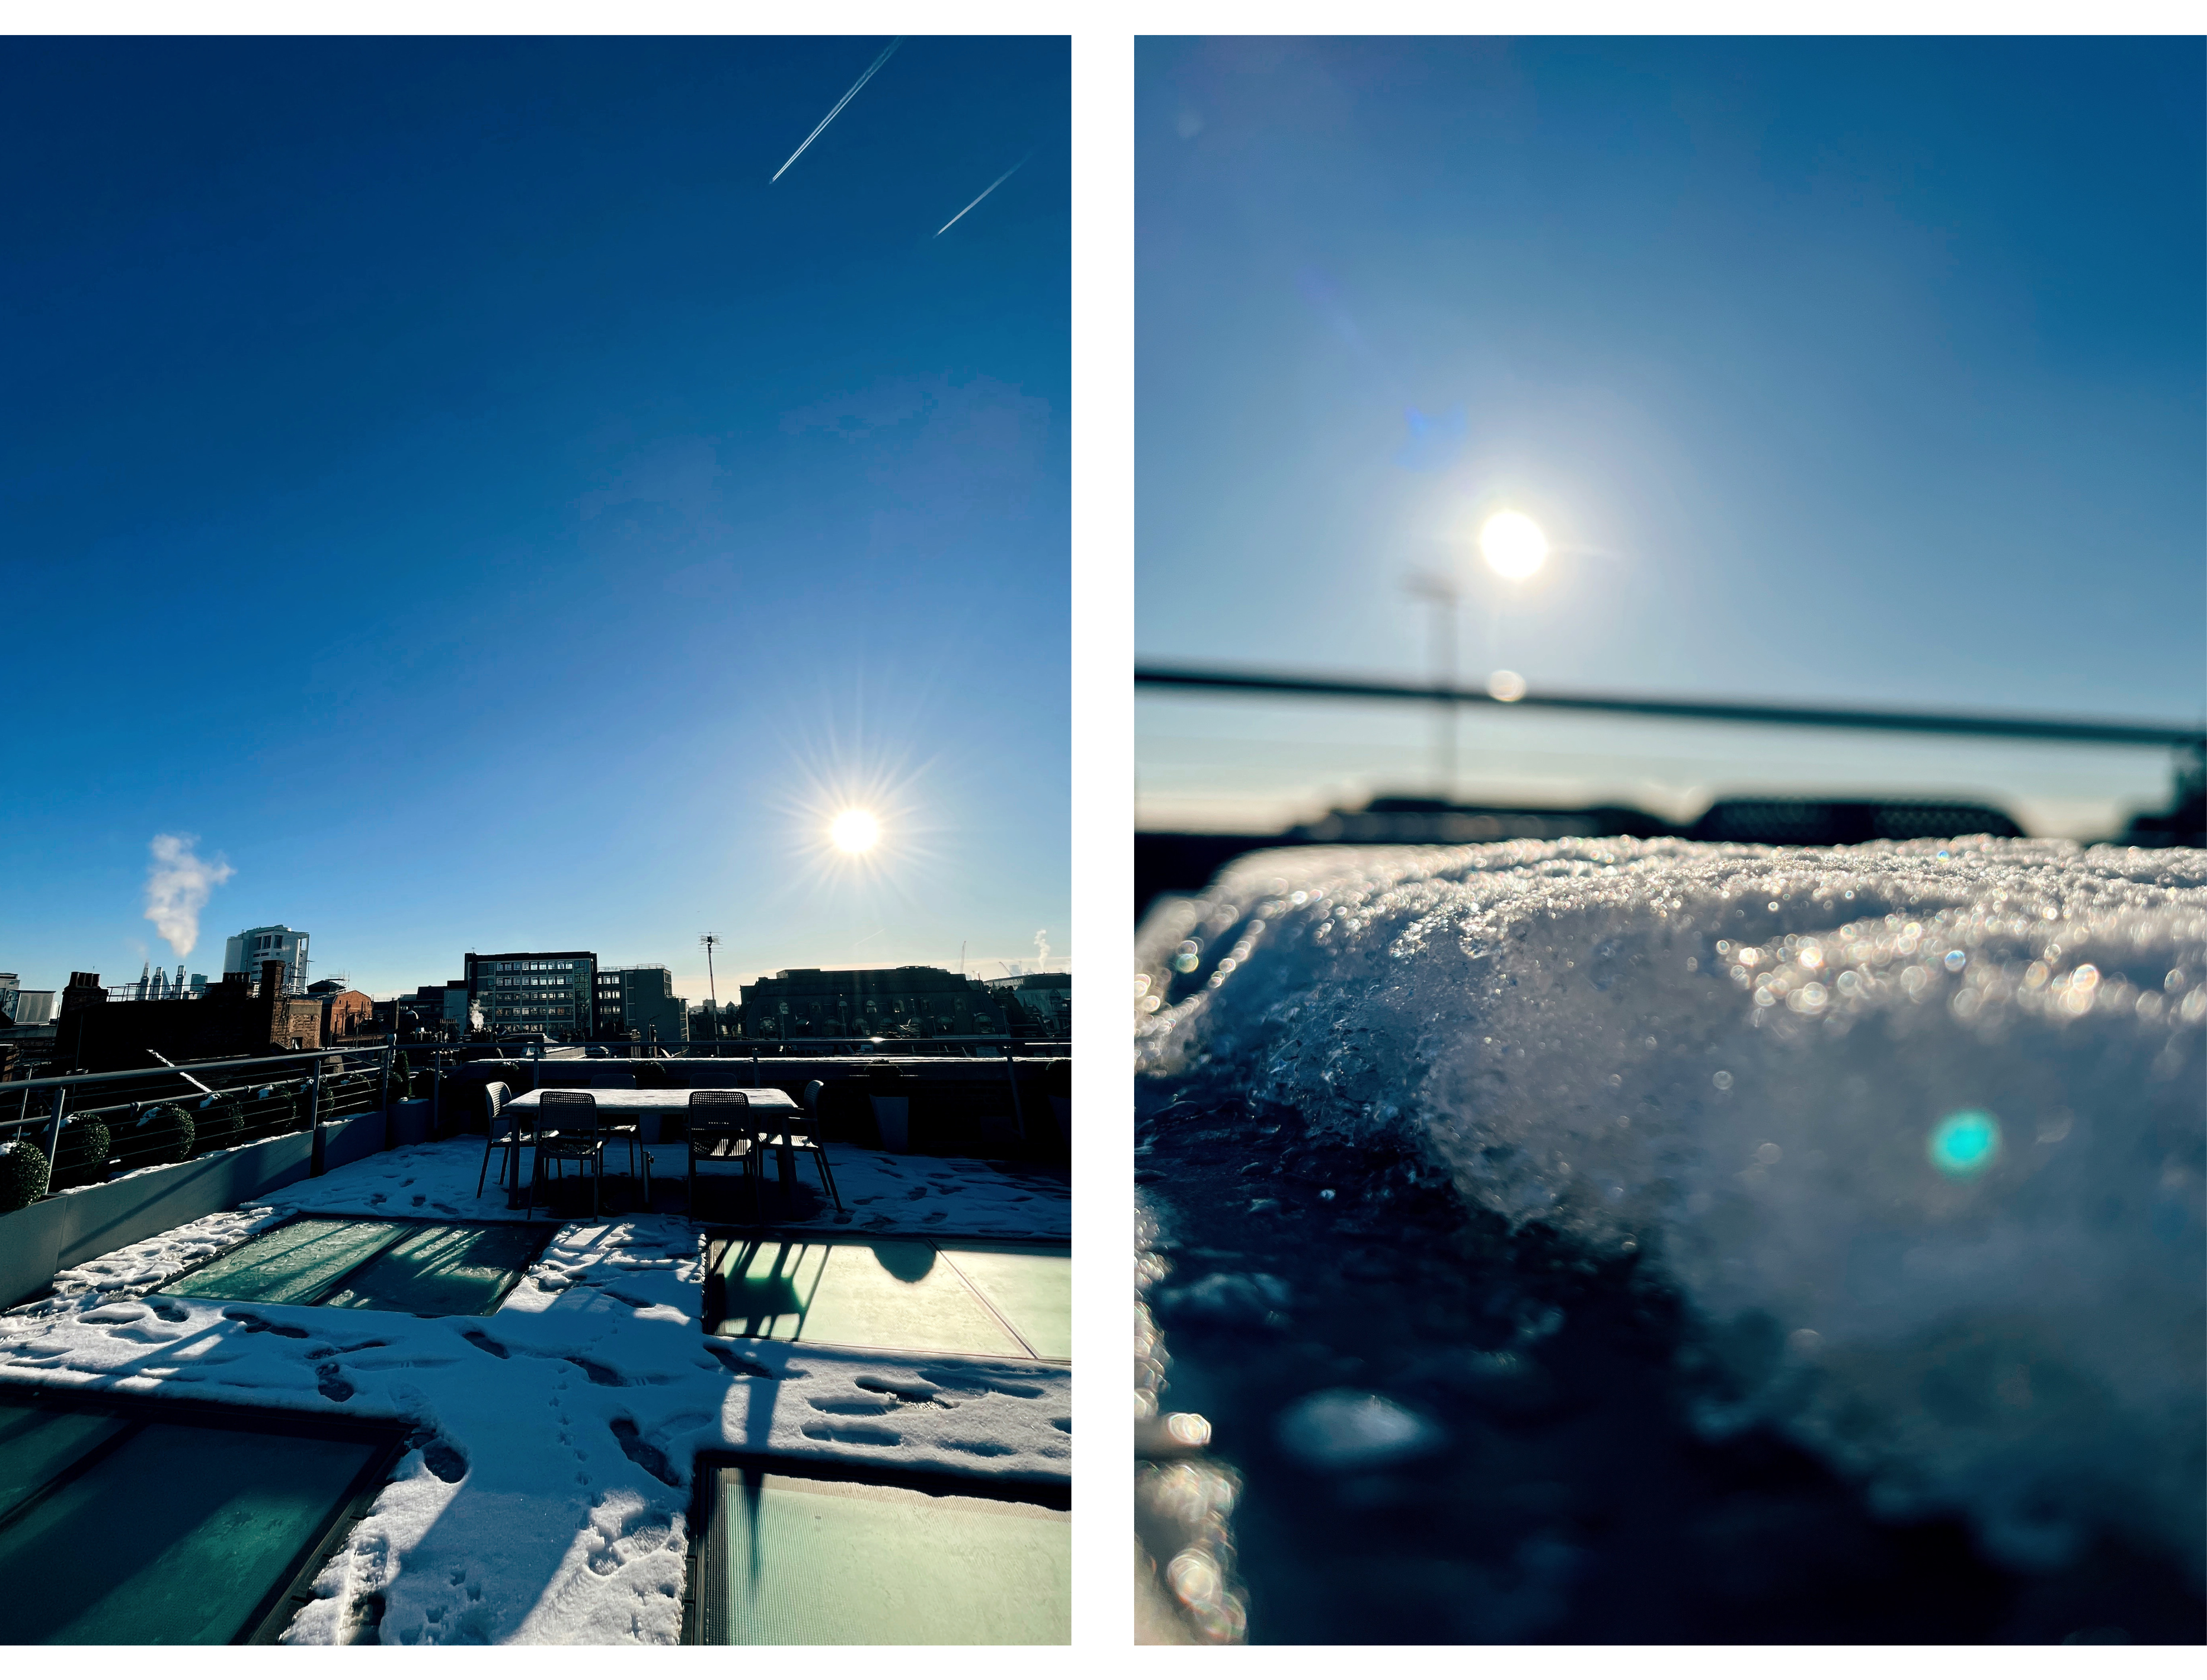 Tapestry-soho-snow-day-rooftop-december-winter-panoramic-event-media-production-christmas-central-london